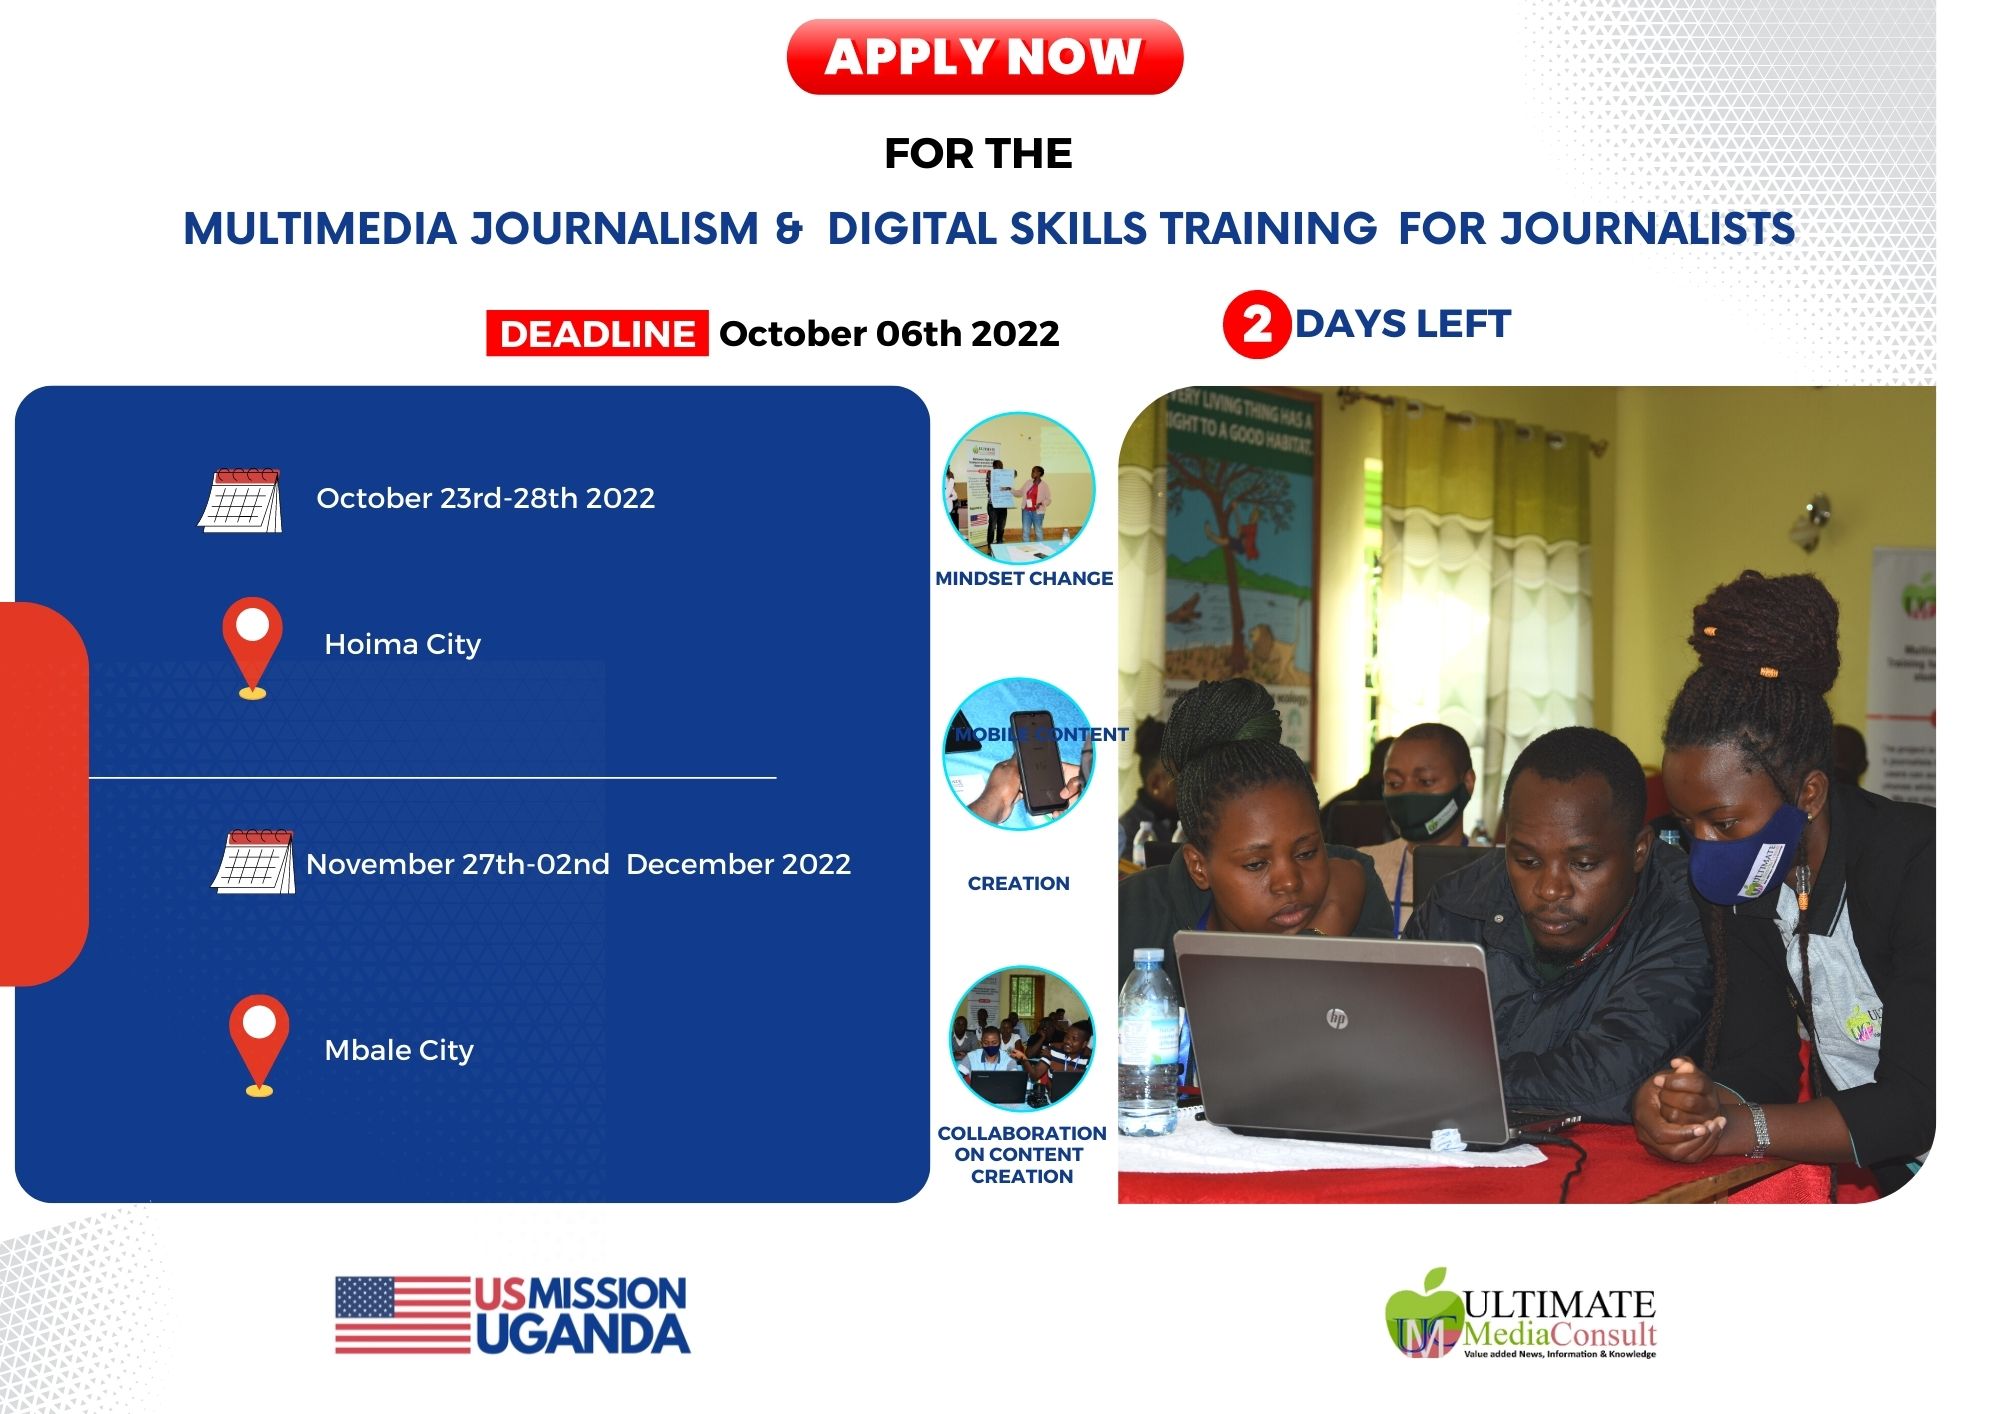 Applications Invited For Journalists To Be Trained In Multimedia Journalism and Digital Skills. 1